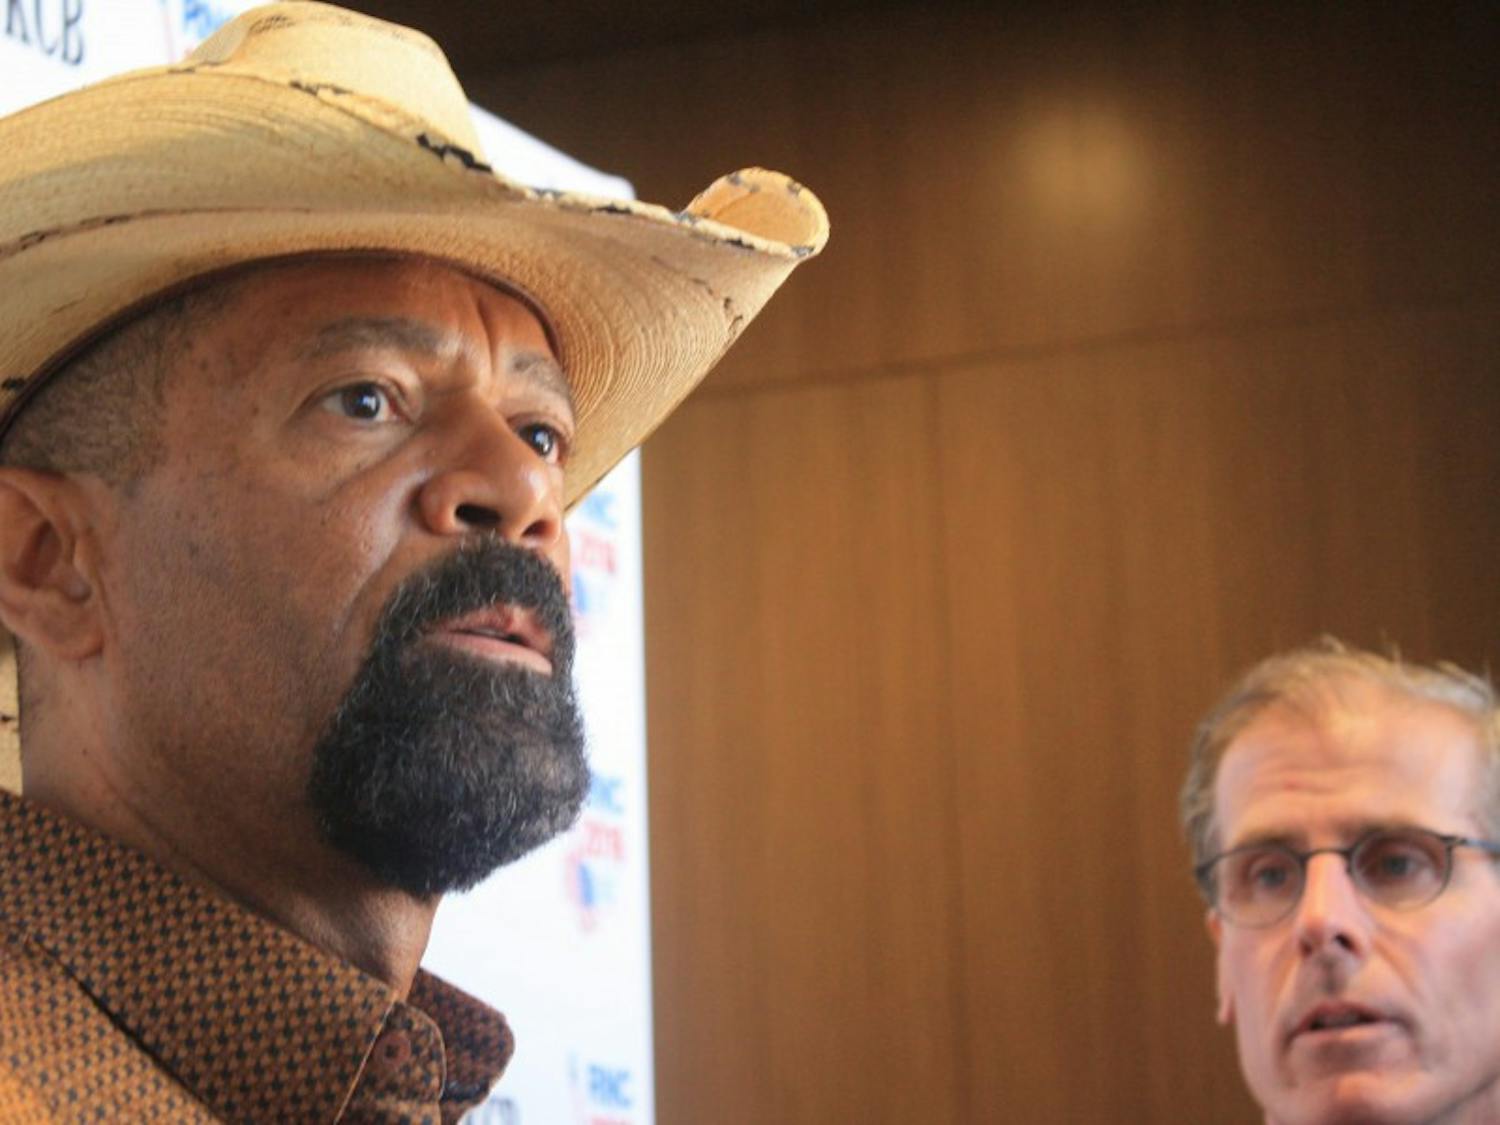 Milwaukee County Sheriff David Clarke said he is a "foot soldier" for the Trump campaign and will be ready to help out in any way. He talked with reporters after his remarks to Wisconsin's delegation Tuesday morning.